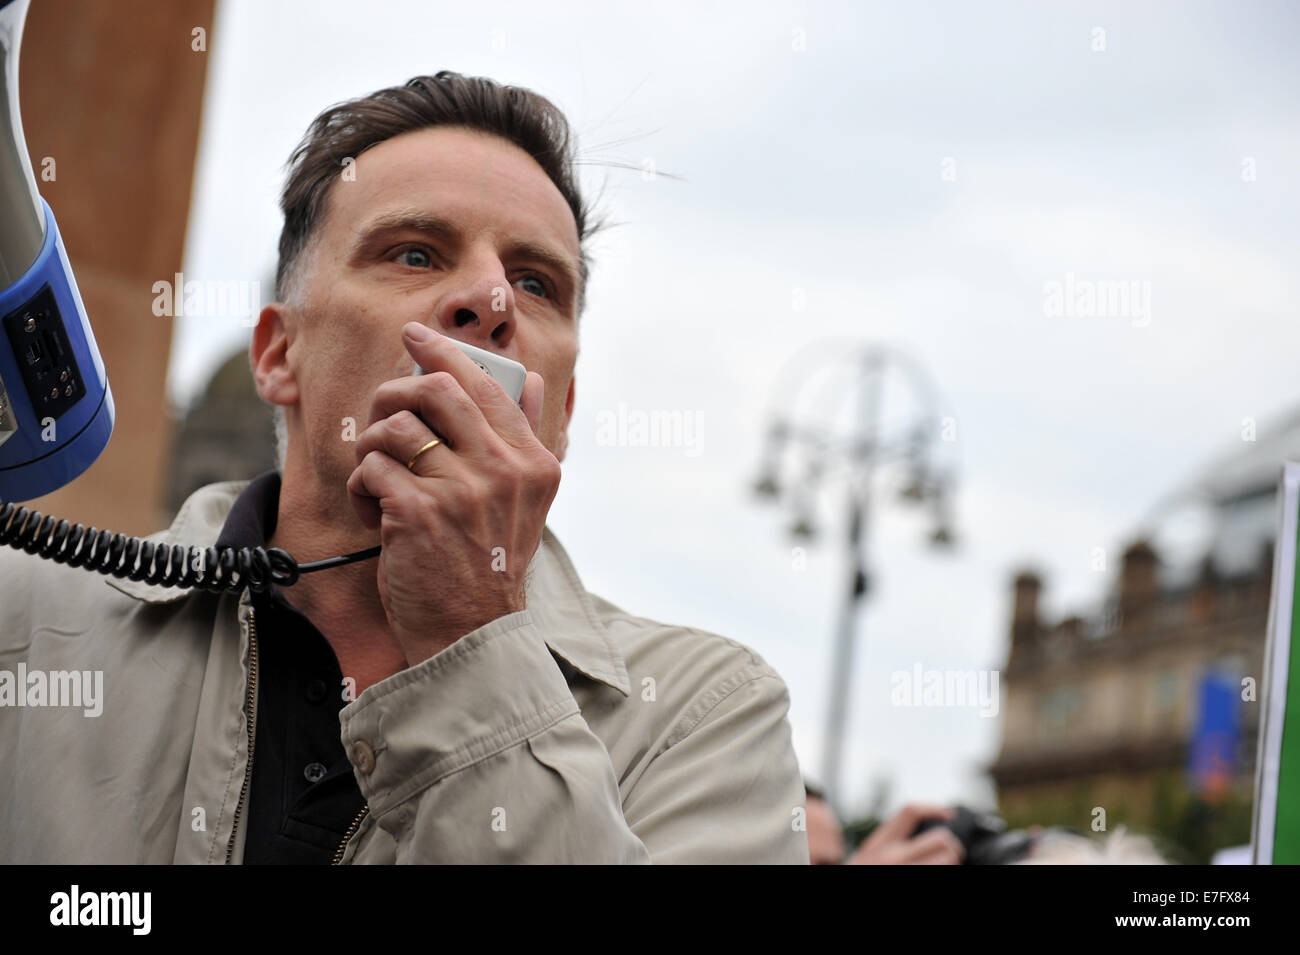 Glasgow, Scotland, UK. 16th September, 2014. Scottish pro-independence rally. Deacon Blue frontman Ricky Ross addresses Yes crowd at Scottish independence rally in George Square, Glasgow. Credit:  Tony Clerkson/Alamy Live News Stock Photo